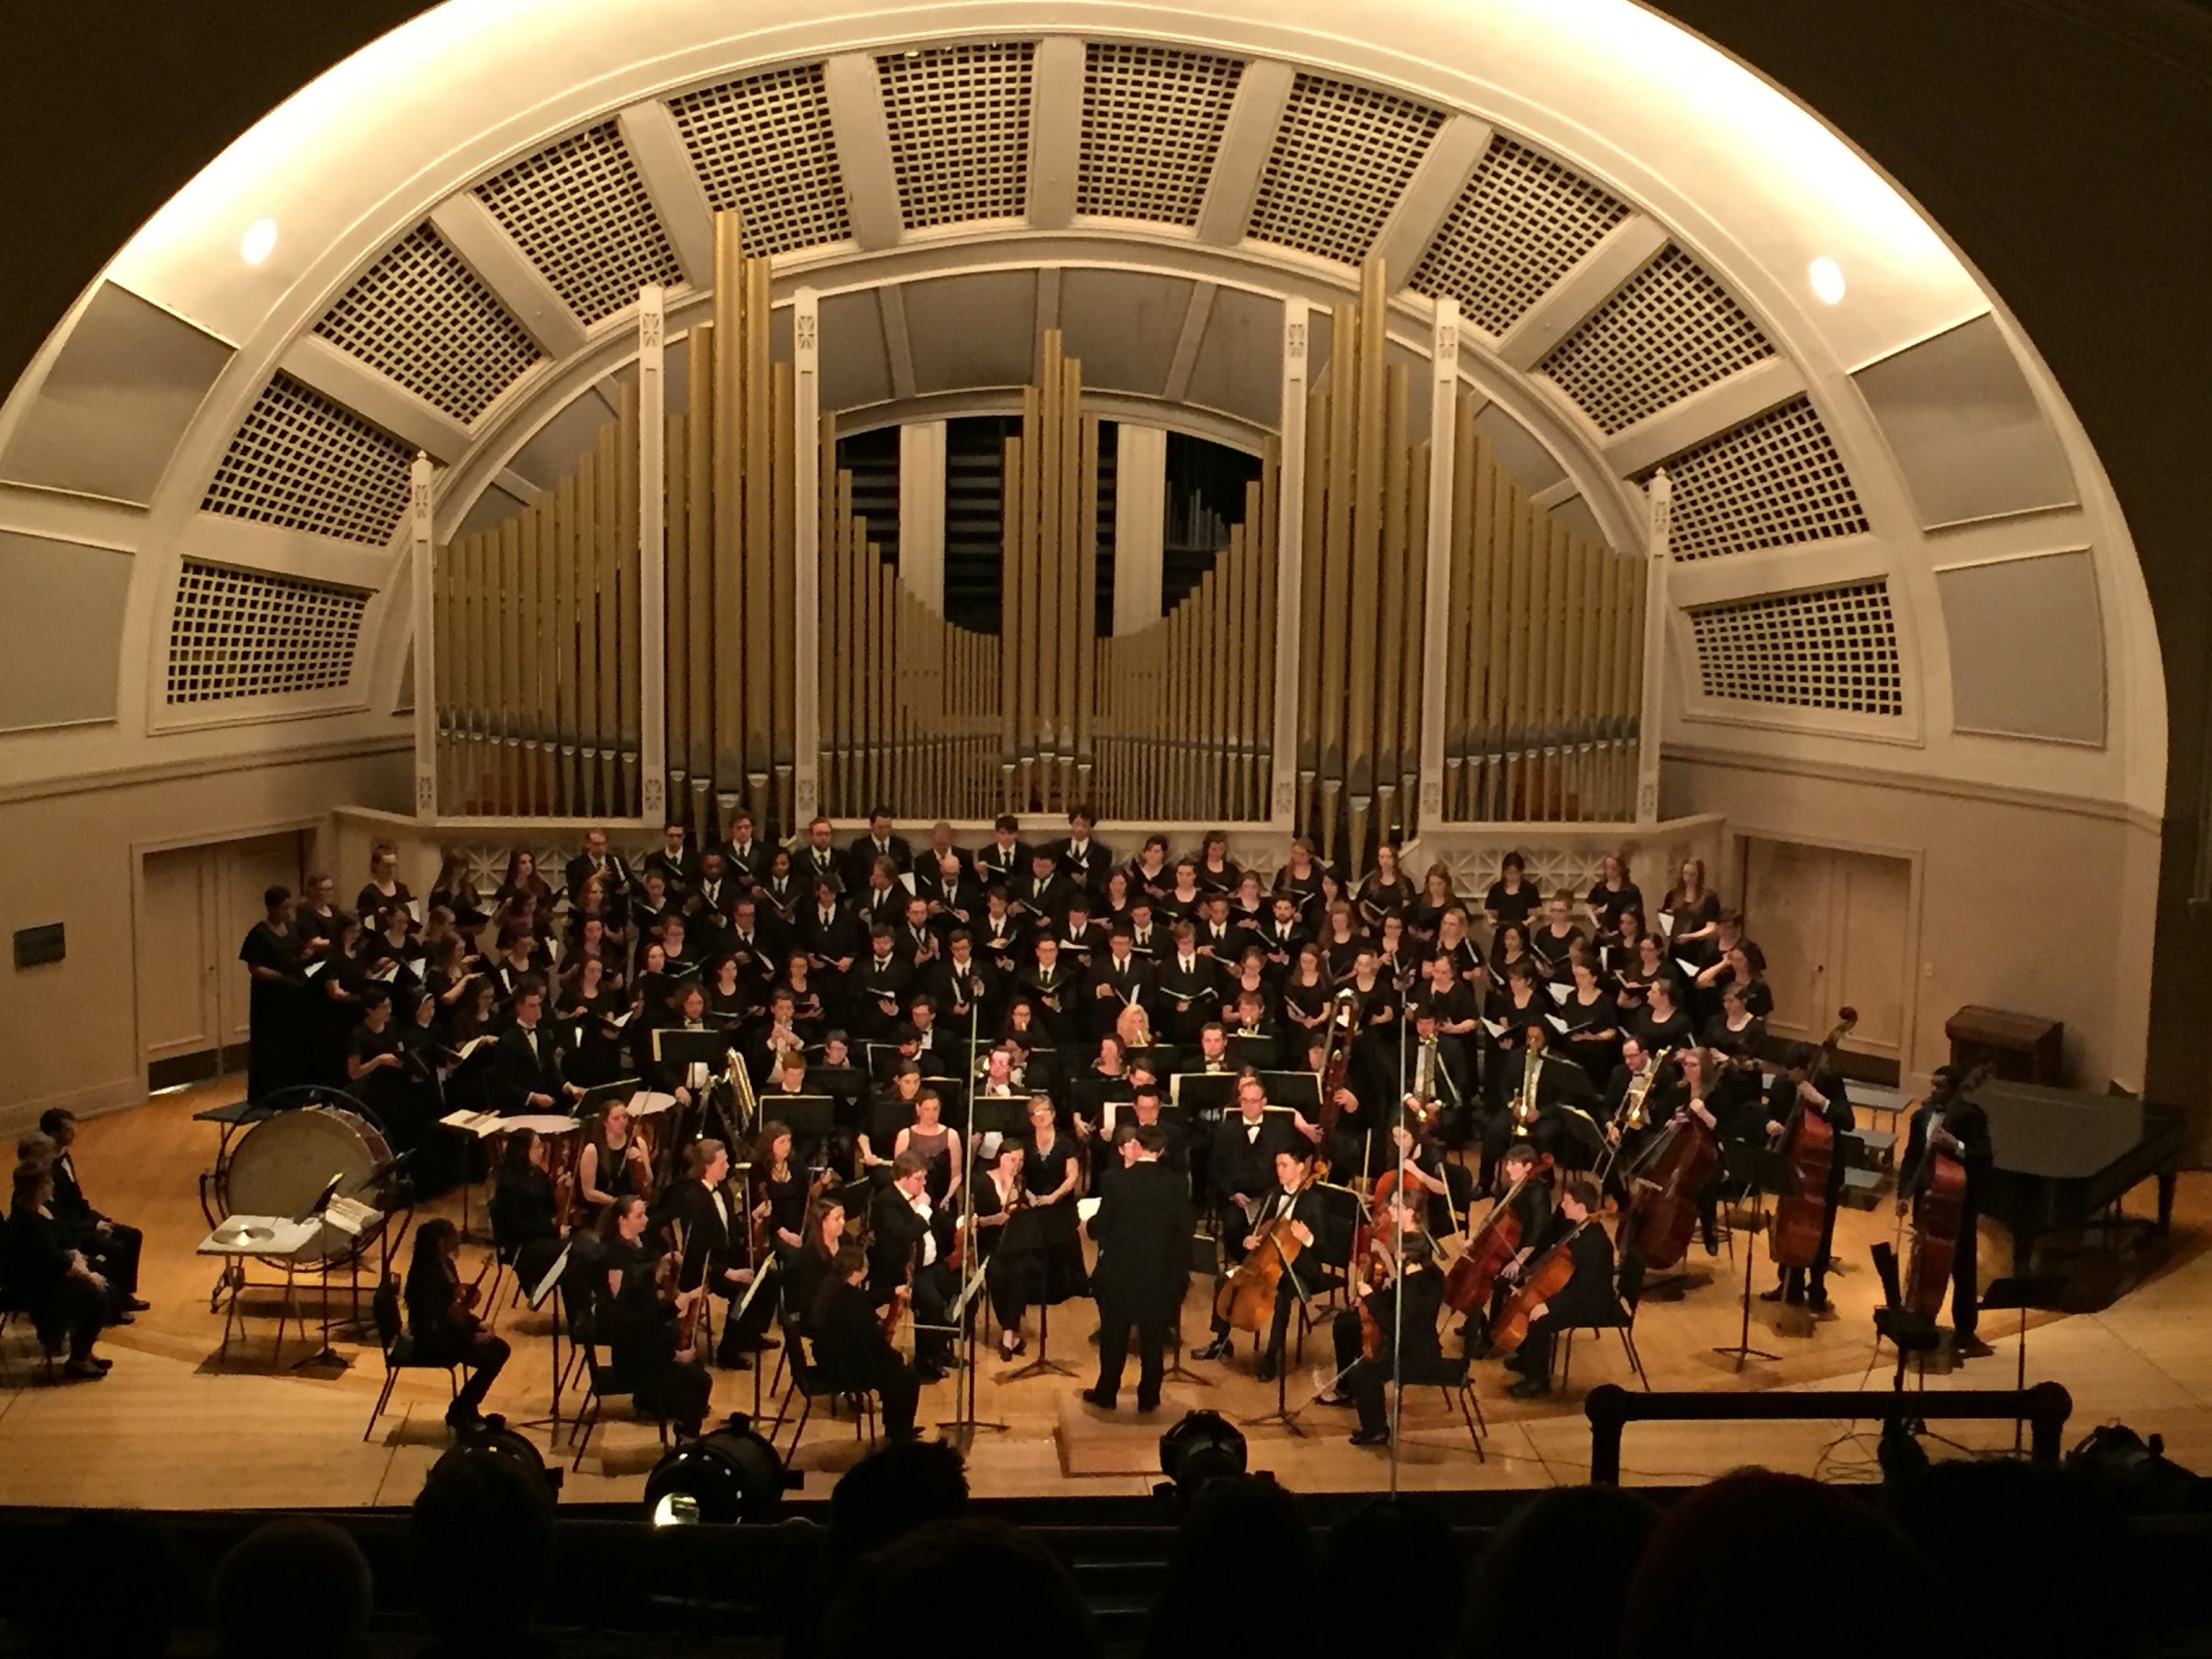 EMU Symphony Orchestra on stage at Pease Auditorium